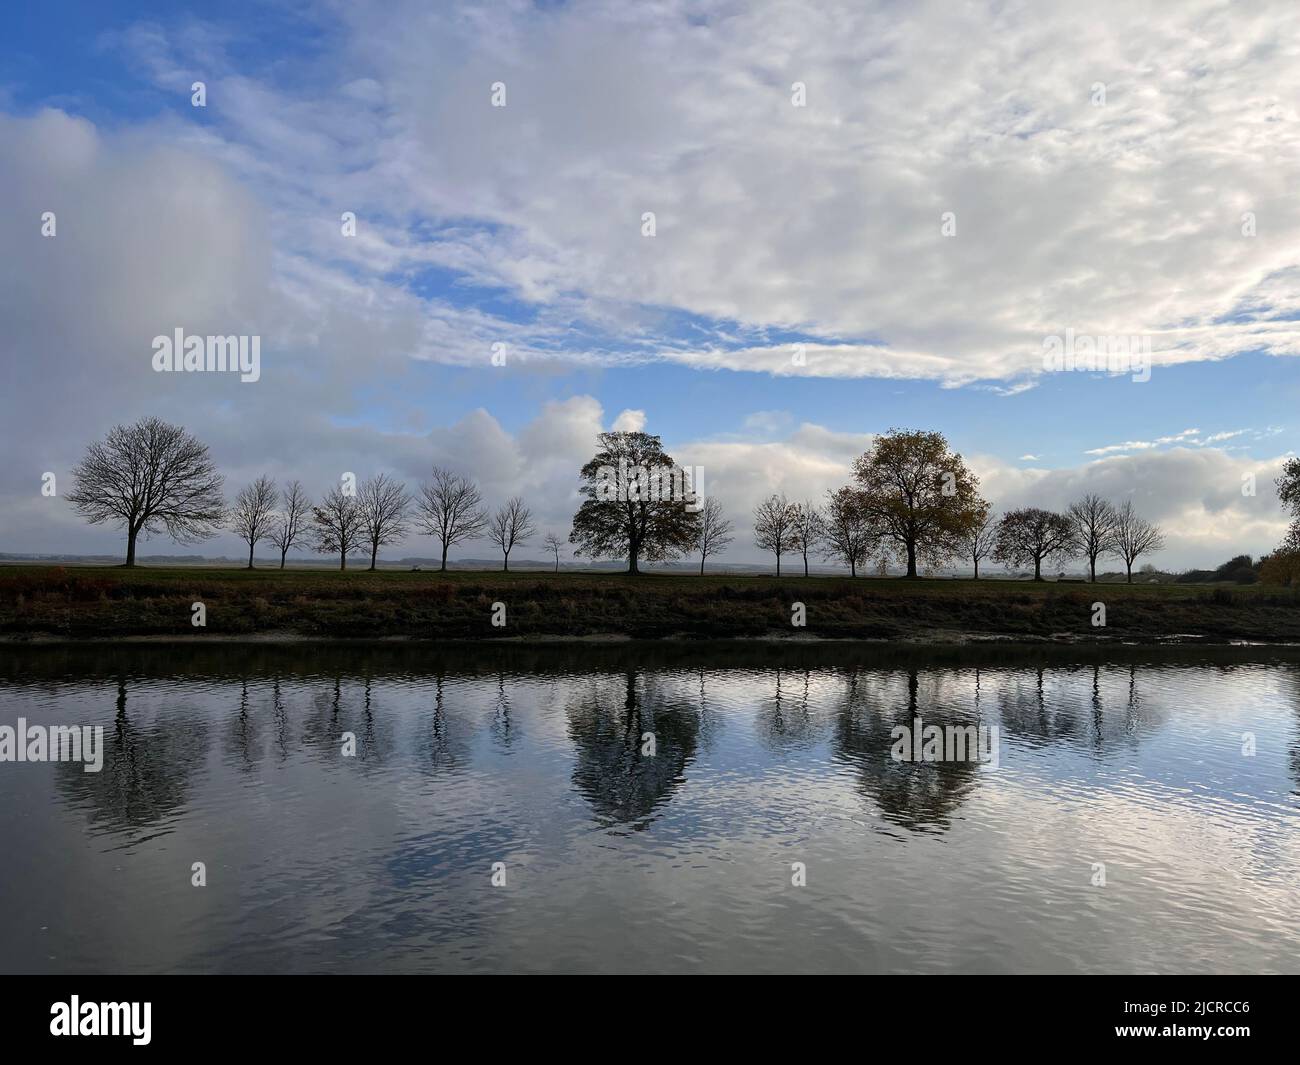 Trees and cloudscape on water reflection, Saint-Valery sur Somme, France Stock Photo